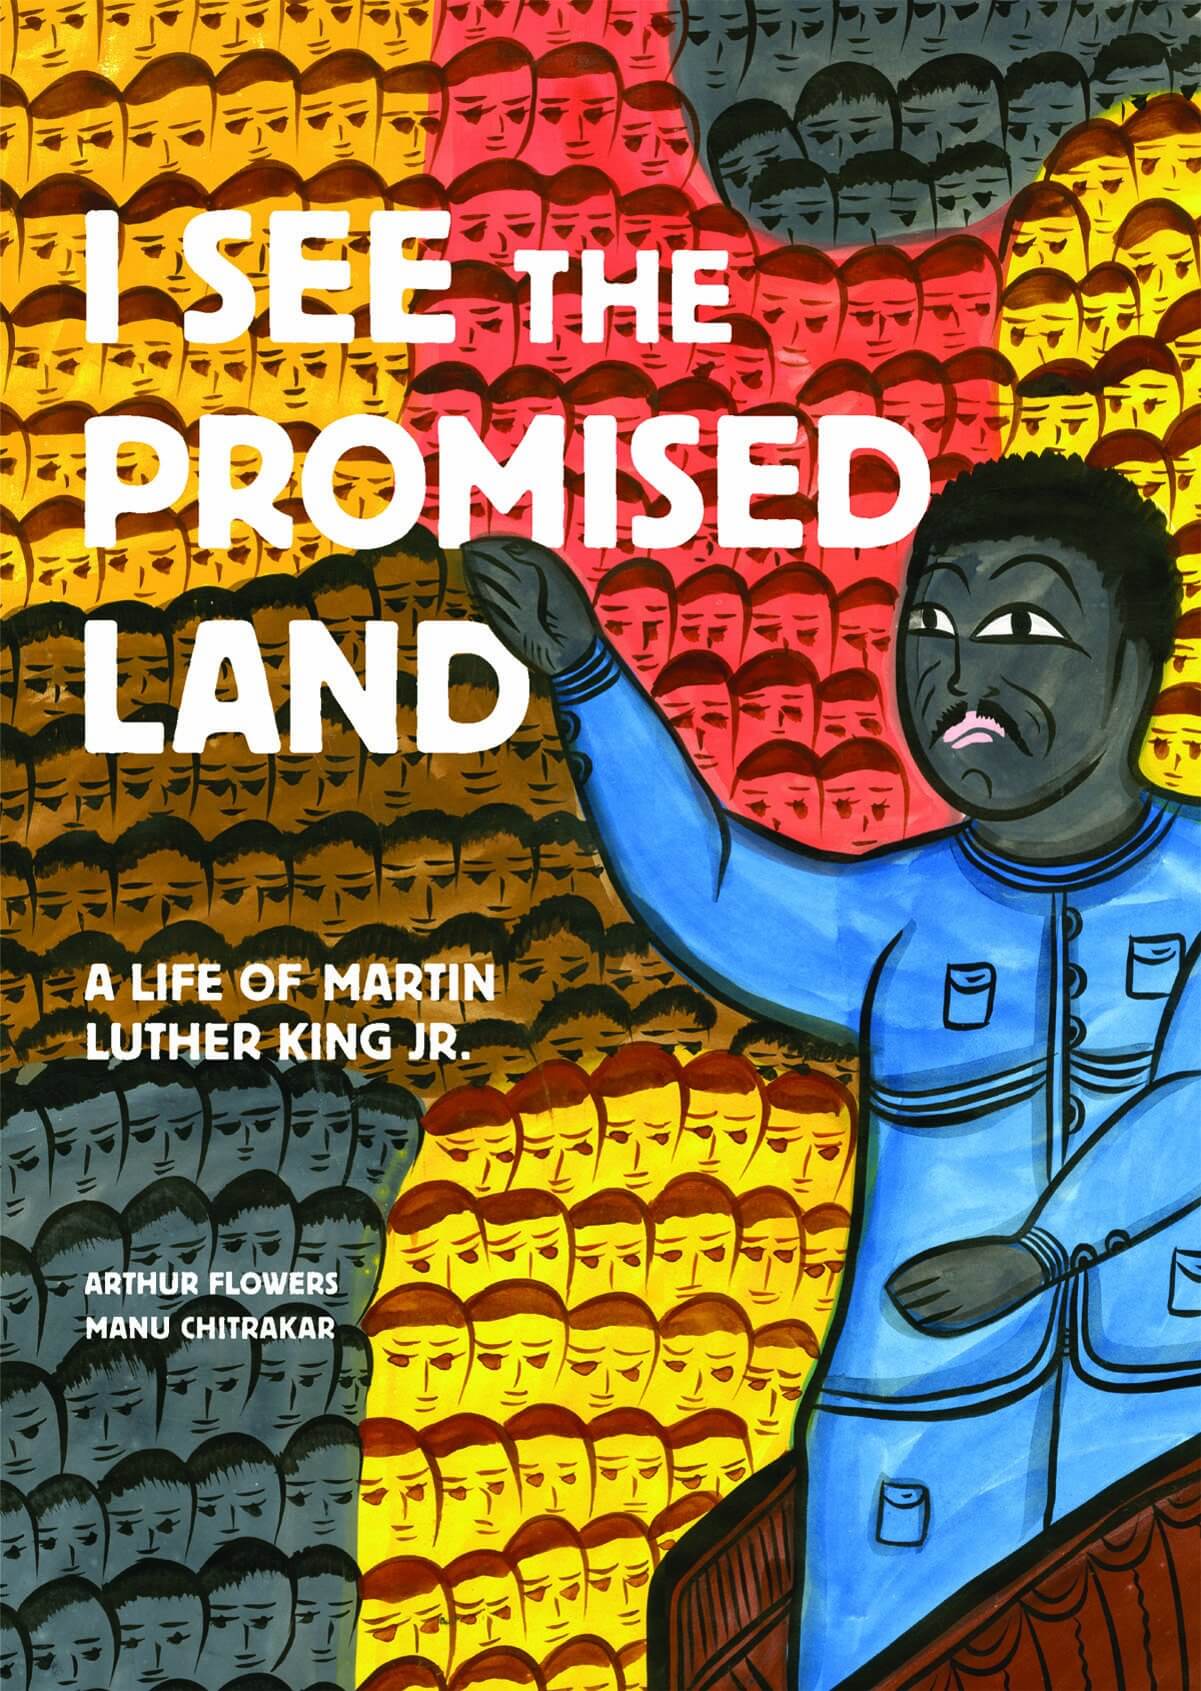 I See the Promised Land: A Life of Martin Luther King Jr. by Arthur Flowers ...1201 x 1691